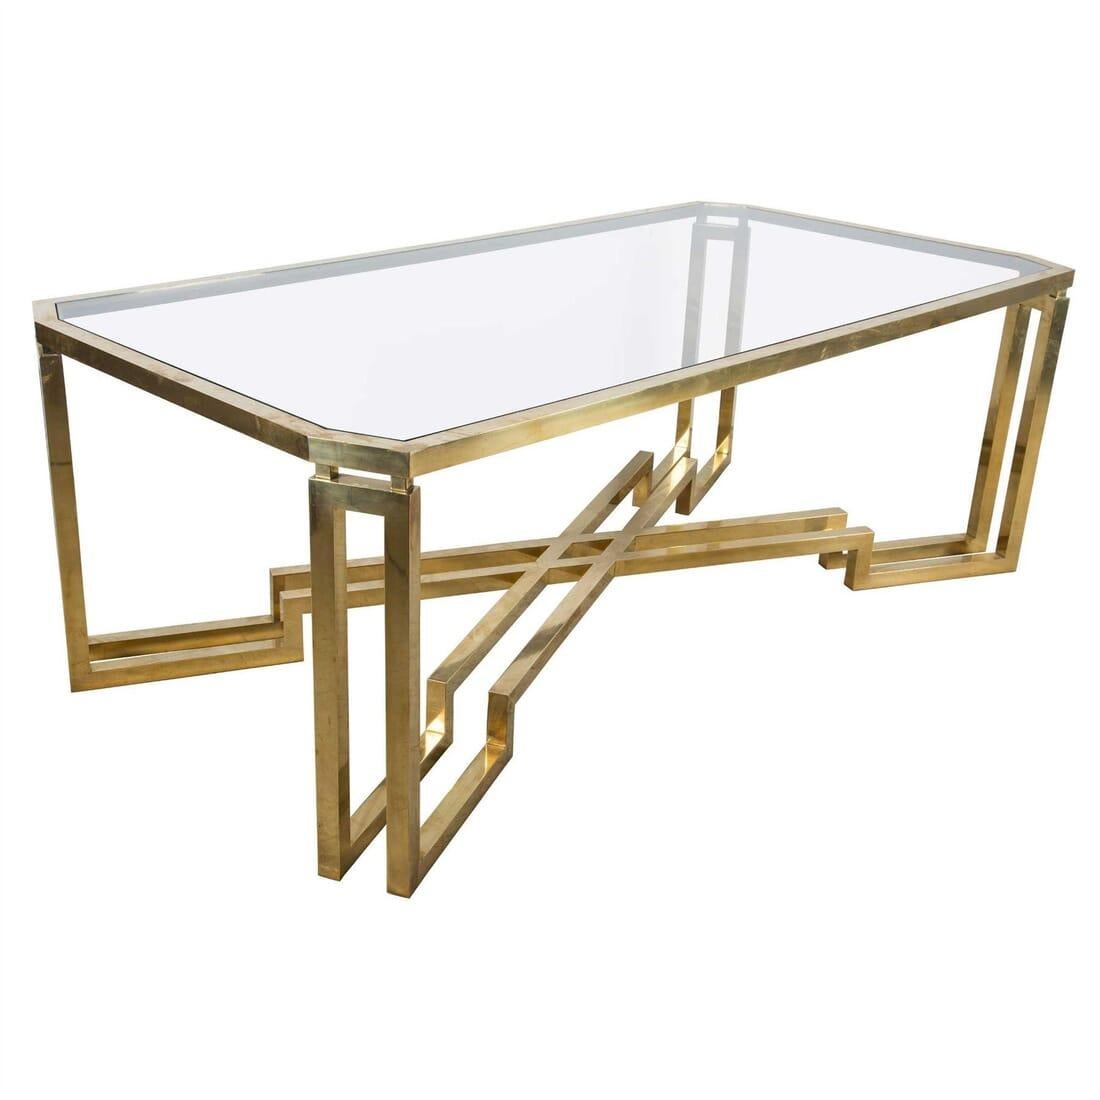 A stunning large scale 1960s Italian brass and glass dining table.